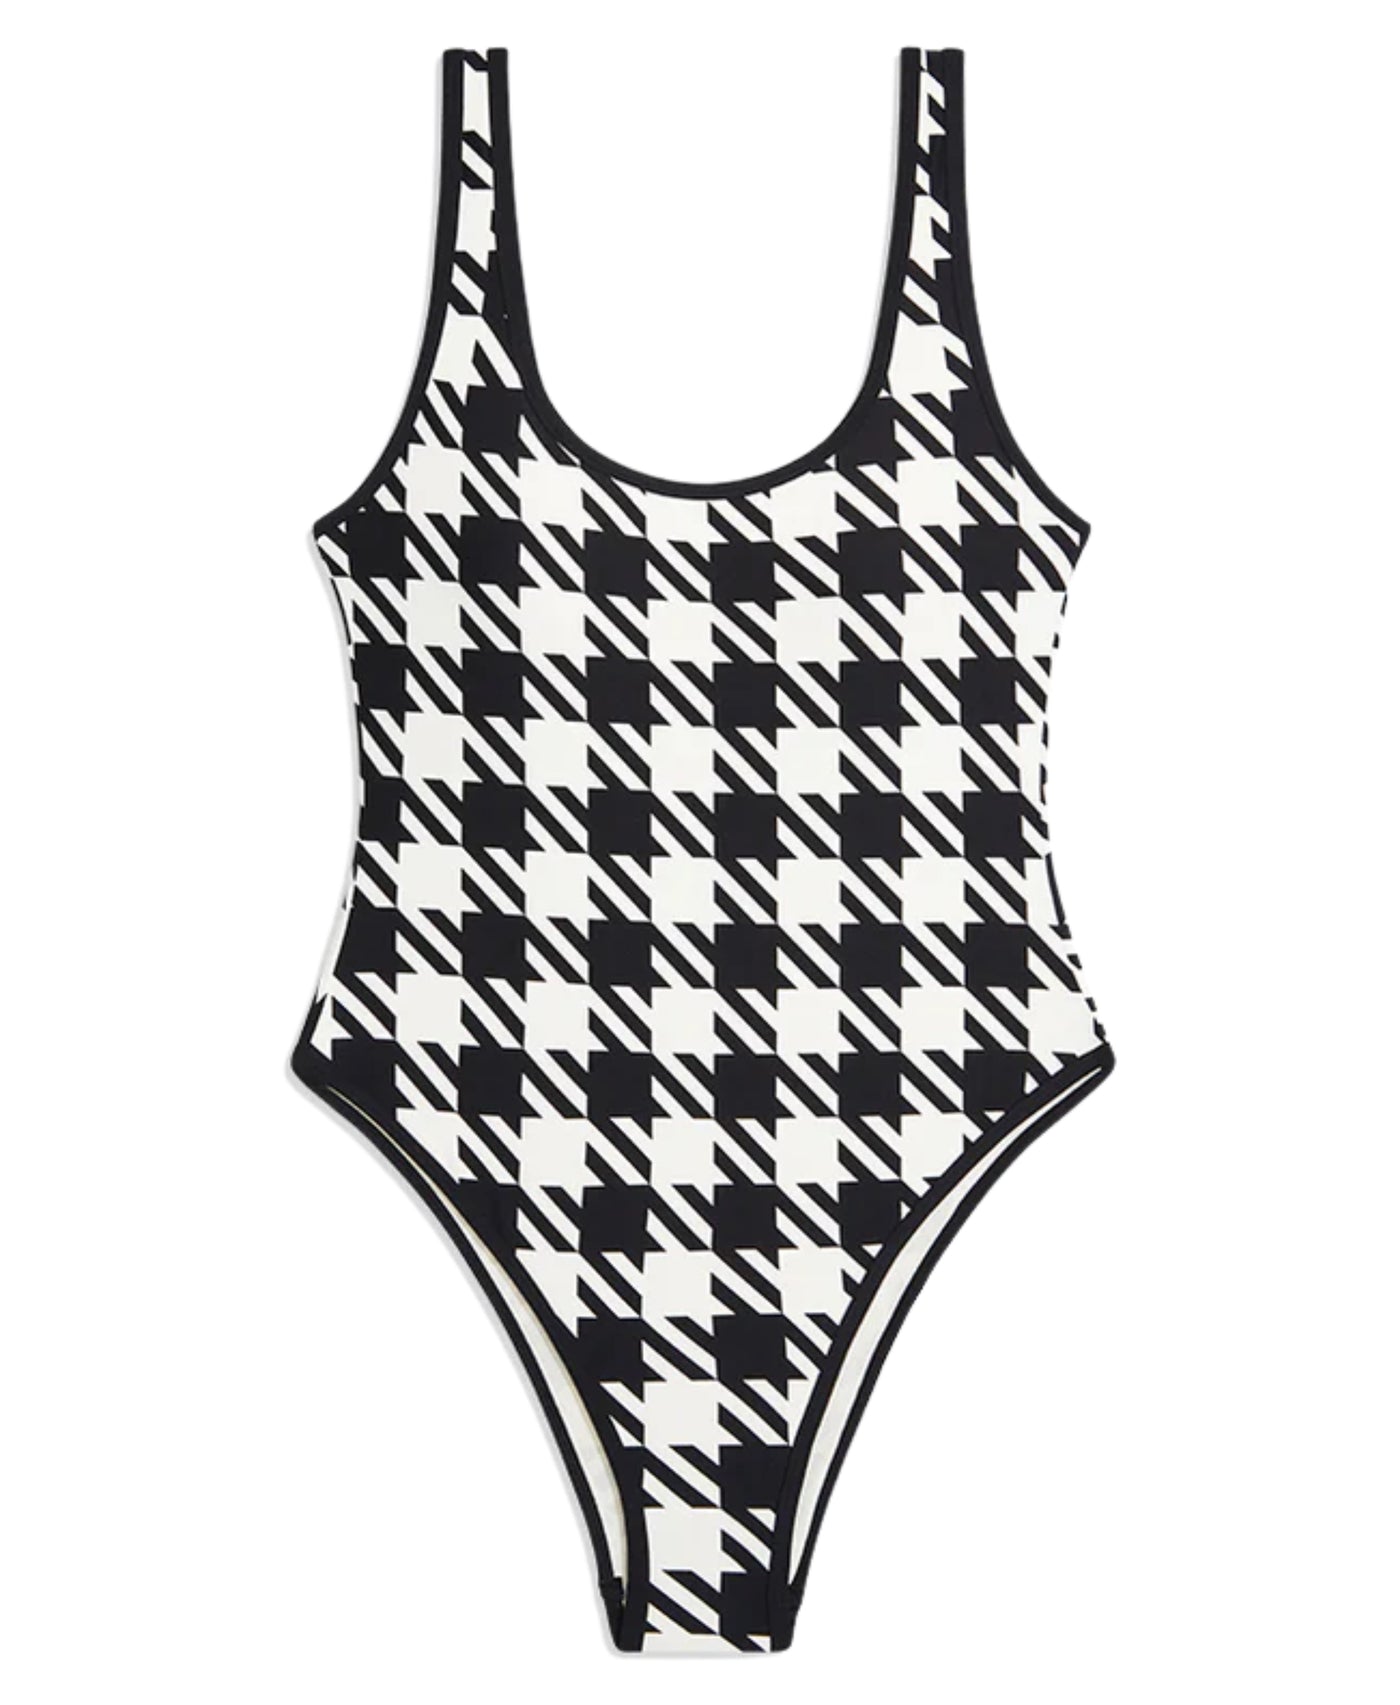 Houndstooth Print One-Piece Swimsuit image 1